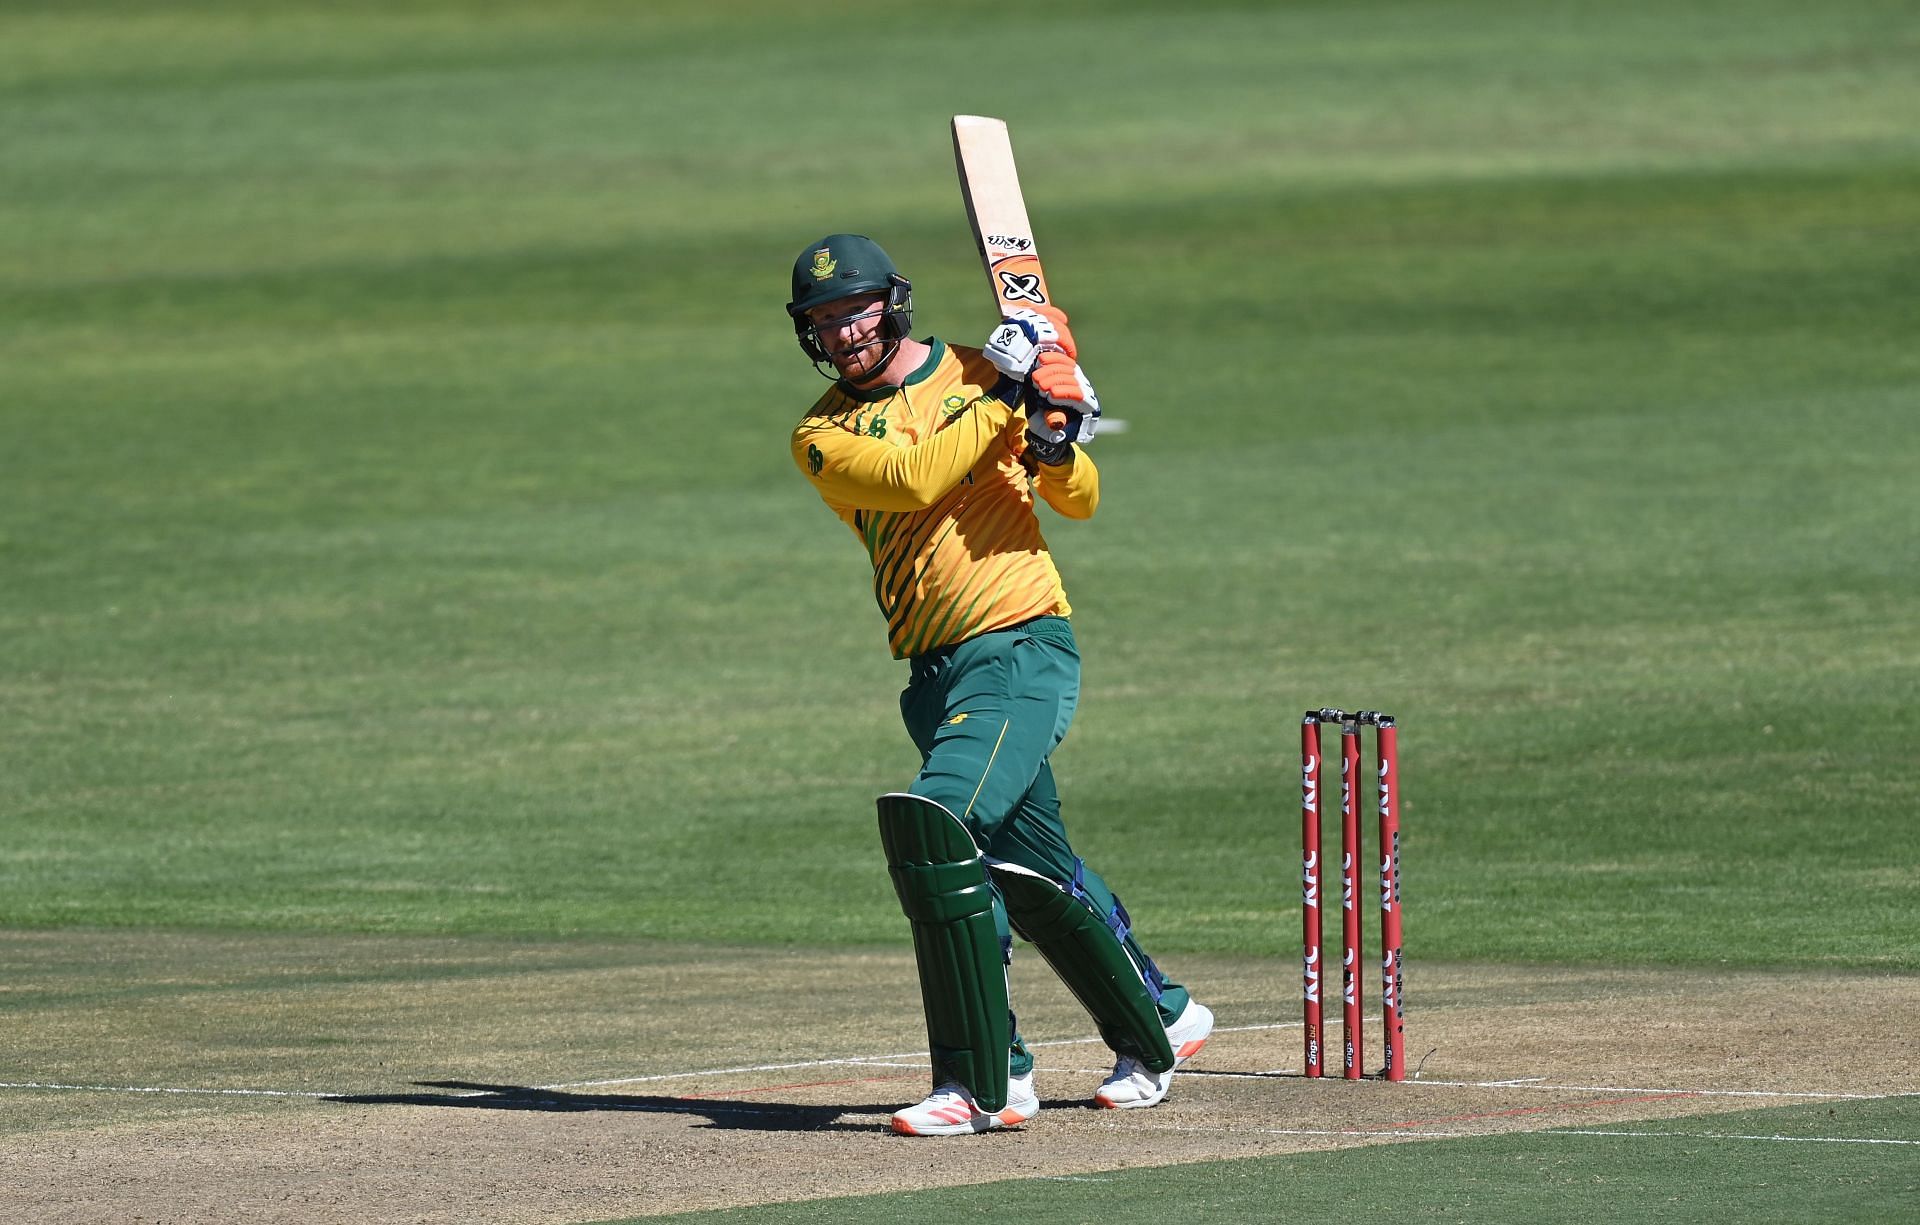 South Africa v England - 2nd T20 International (Image courtesy: Getty Images)